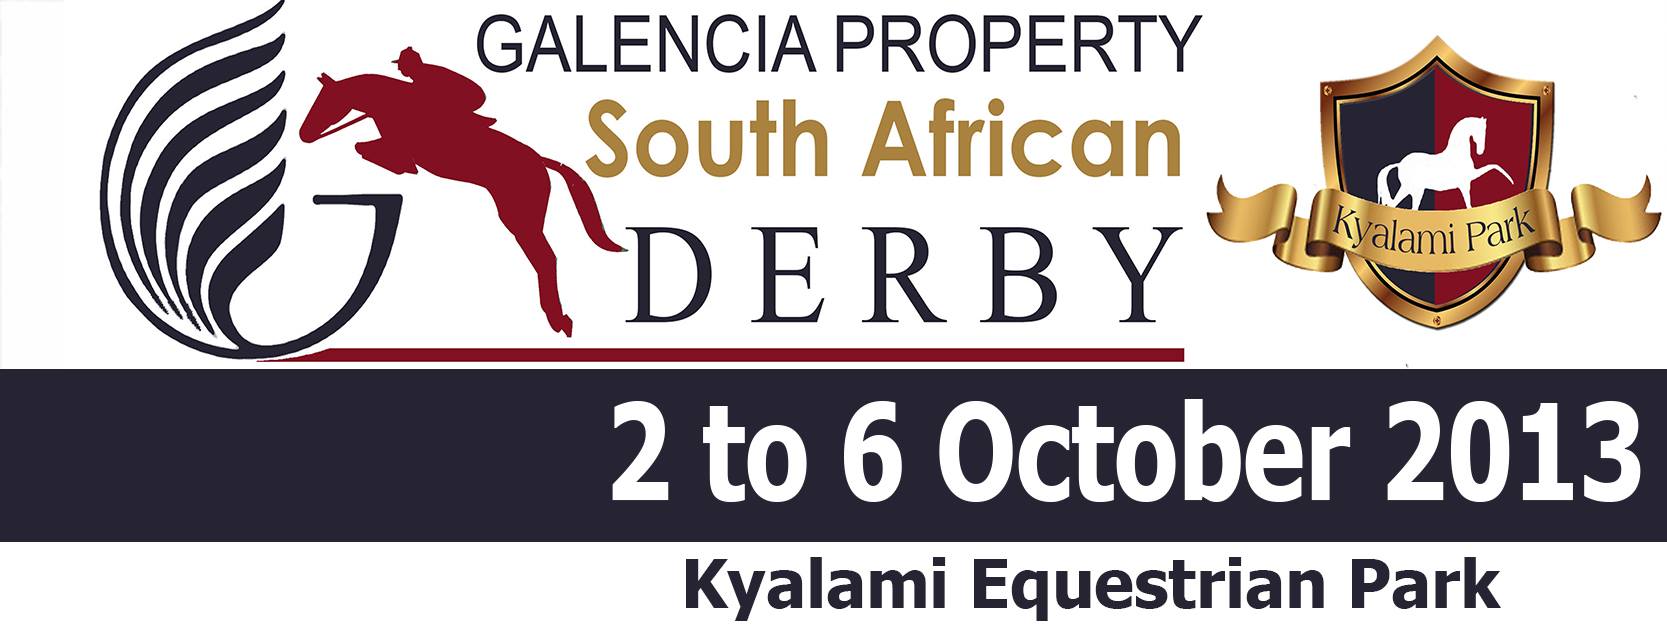 WIN TICKETS: The 2013 Galencia Property “Equestrian” South African Derby.